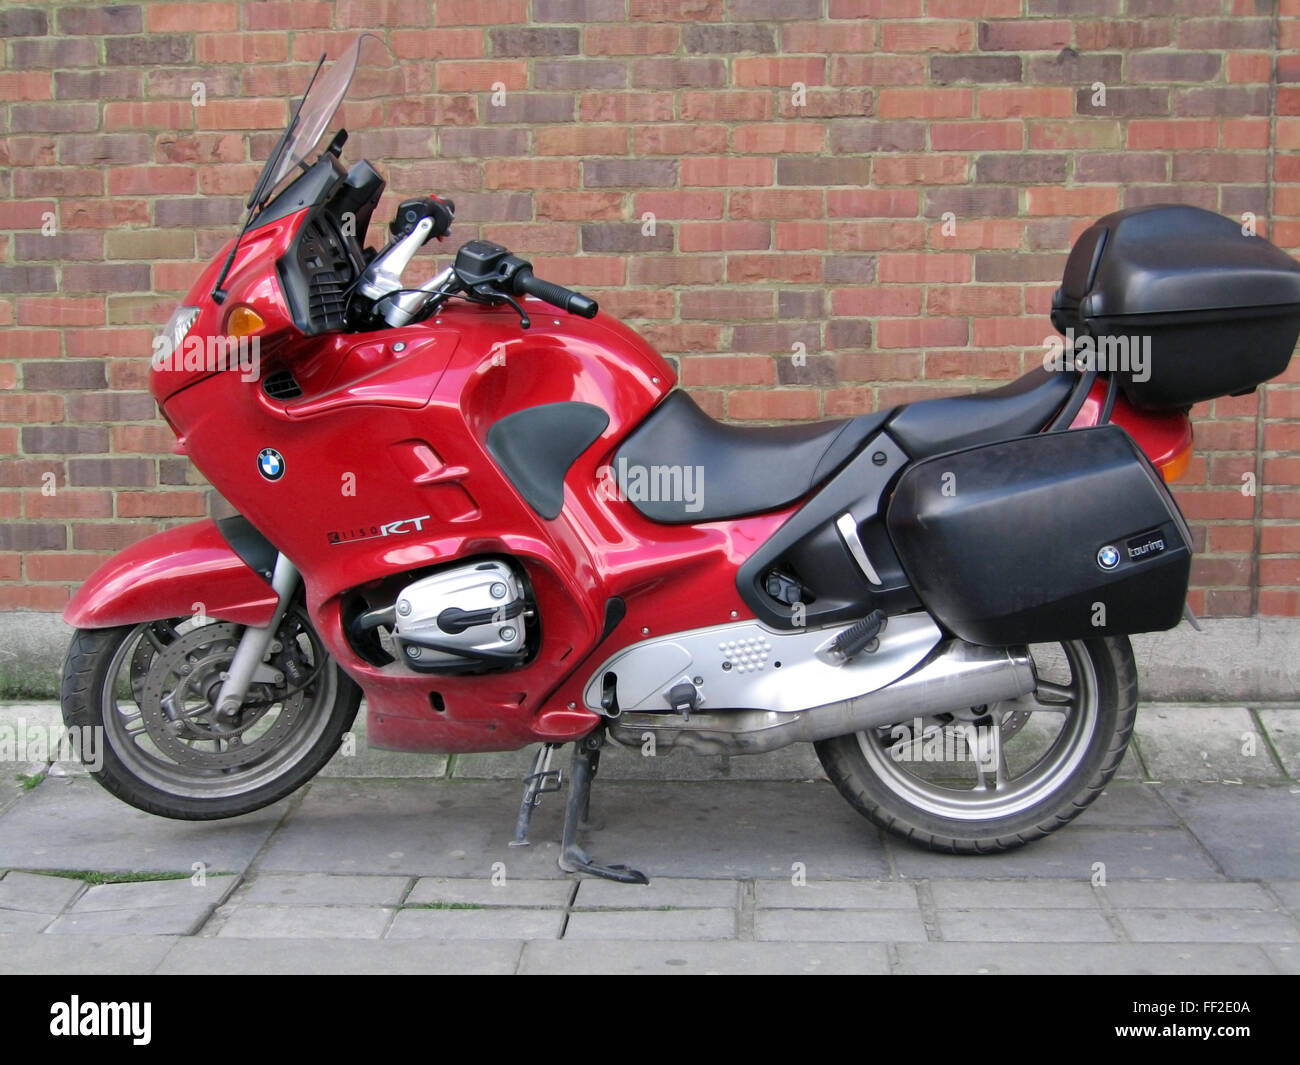 BMW 1150 RT motorcycle parked in Dublin Ireland Stock Photo